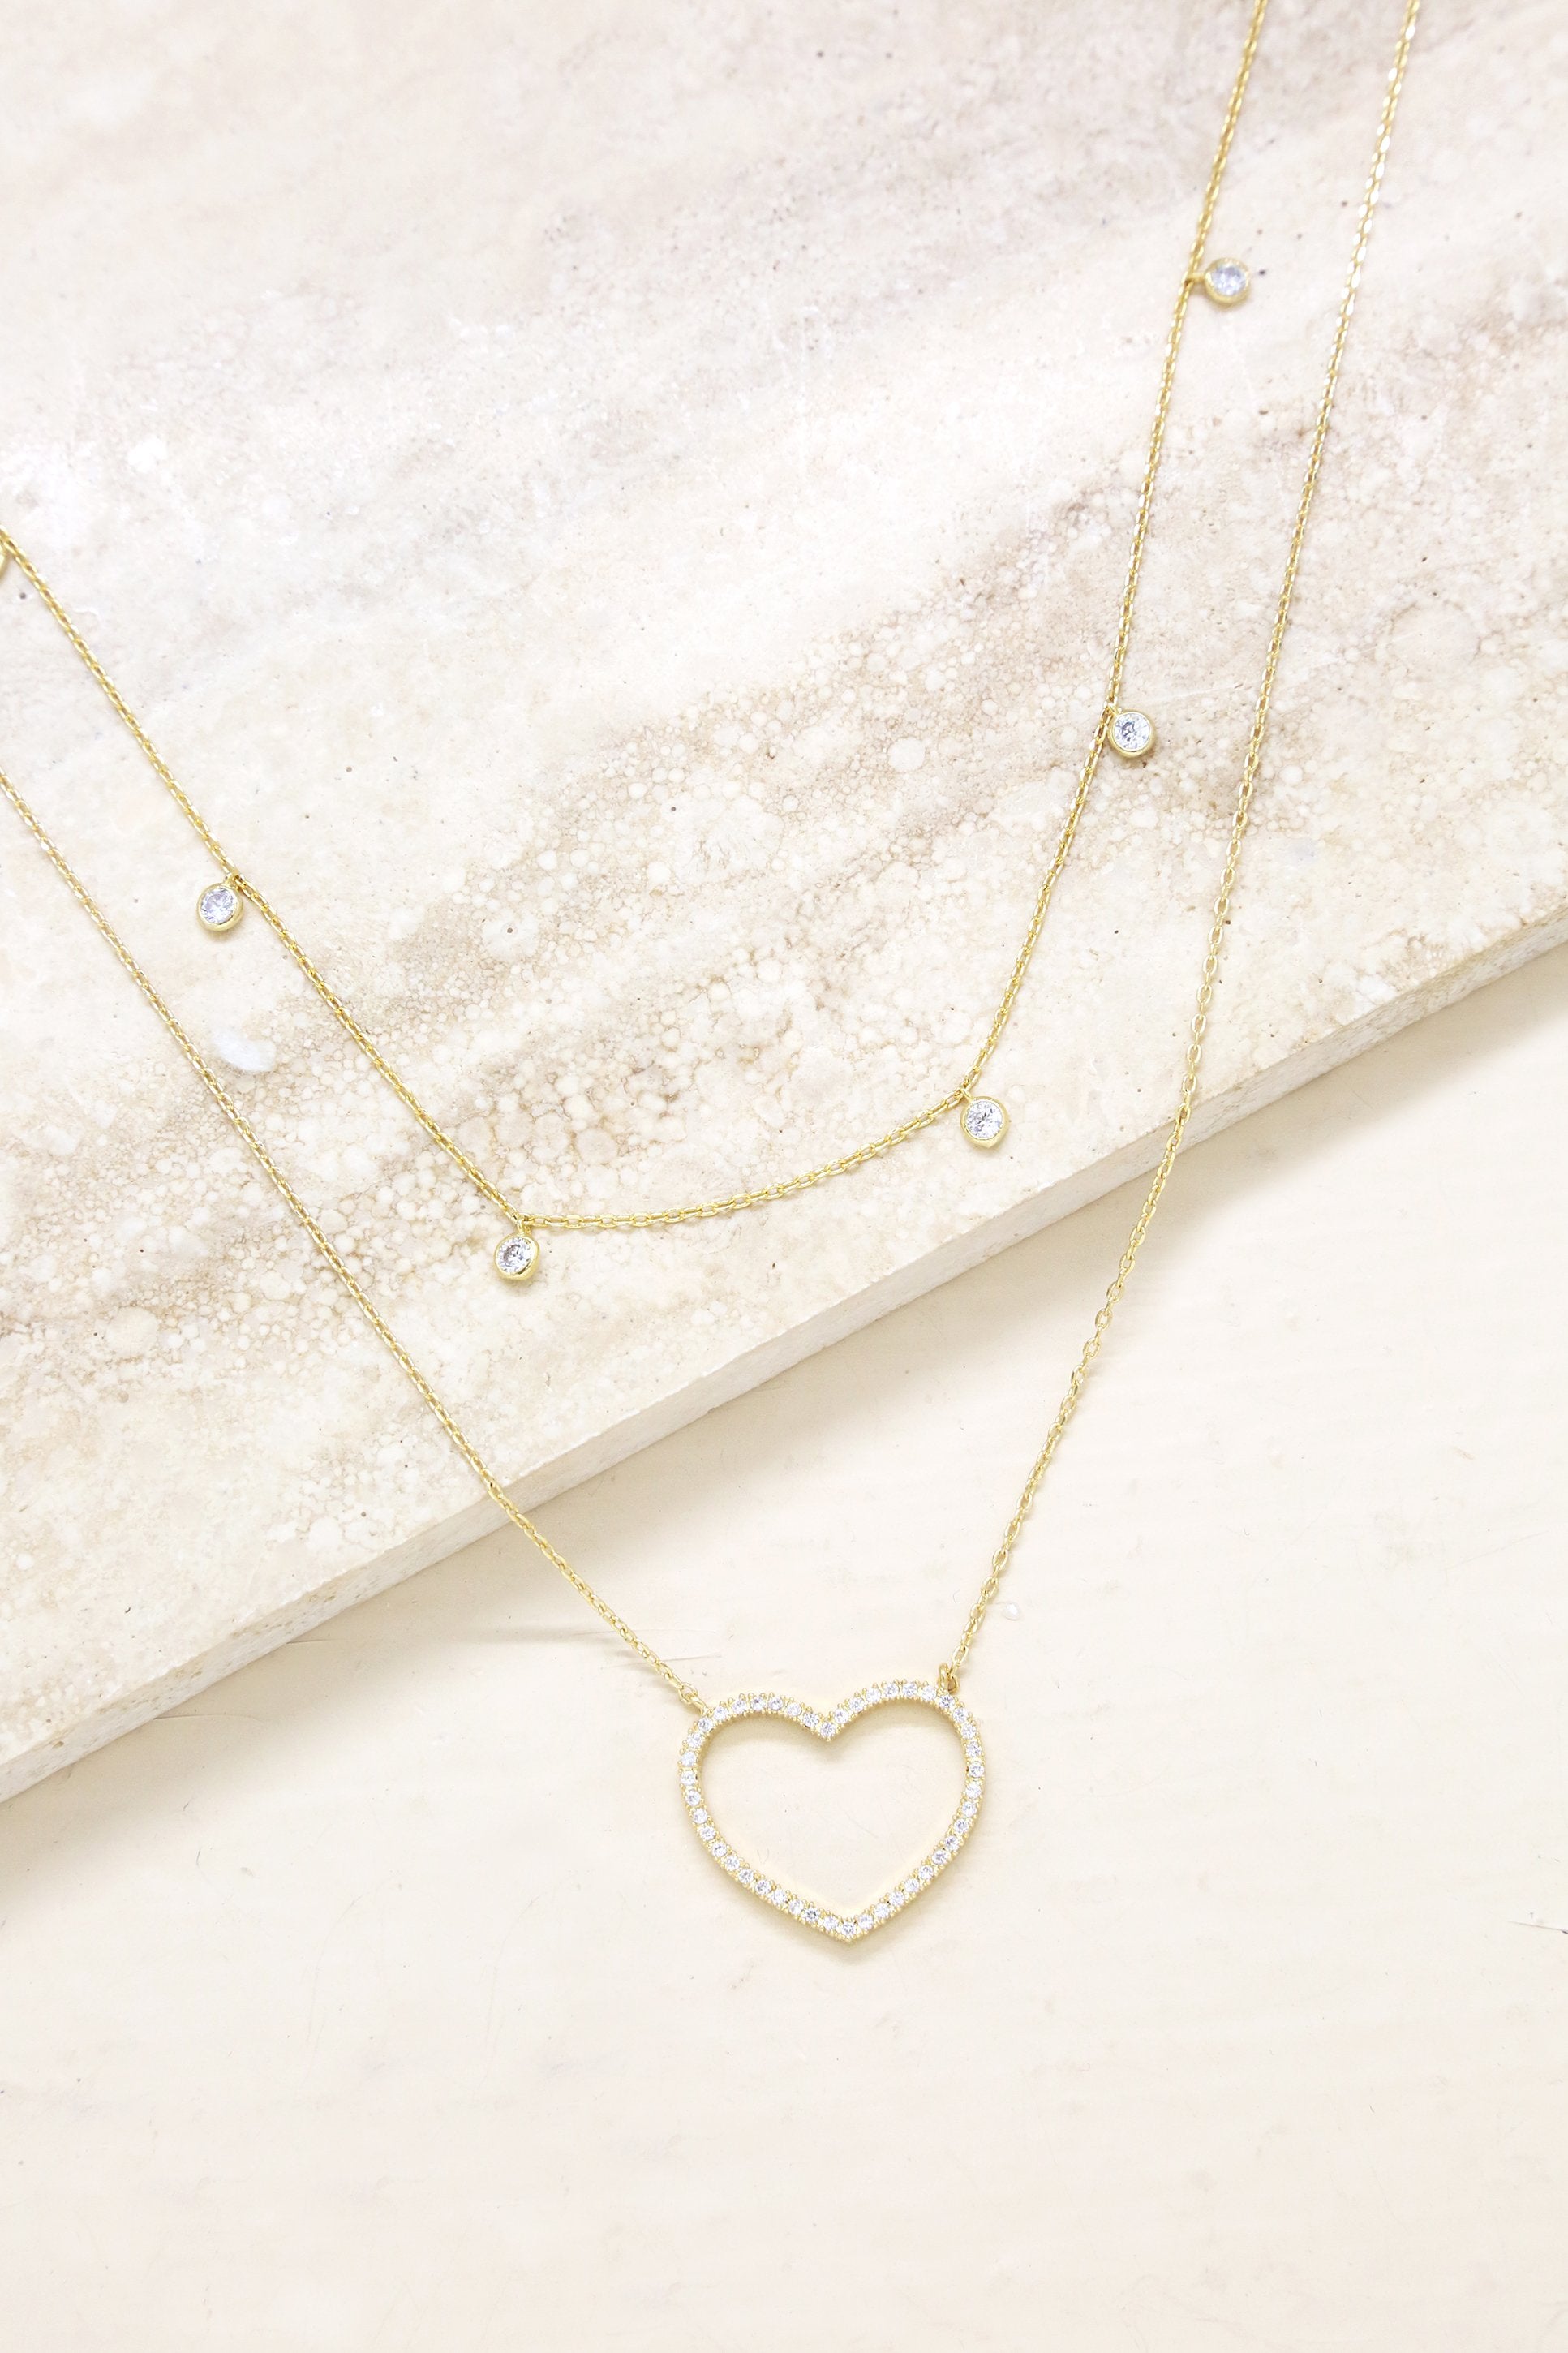 Crystal Heart and Drop Layered 18k Gold Plated Necklace Set of 2